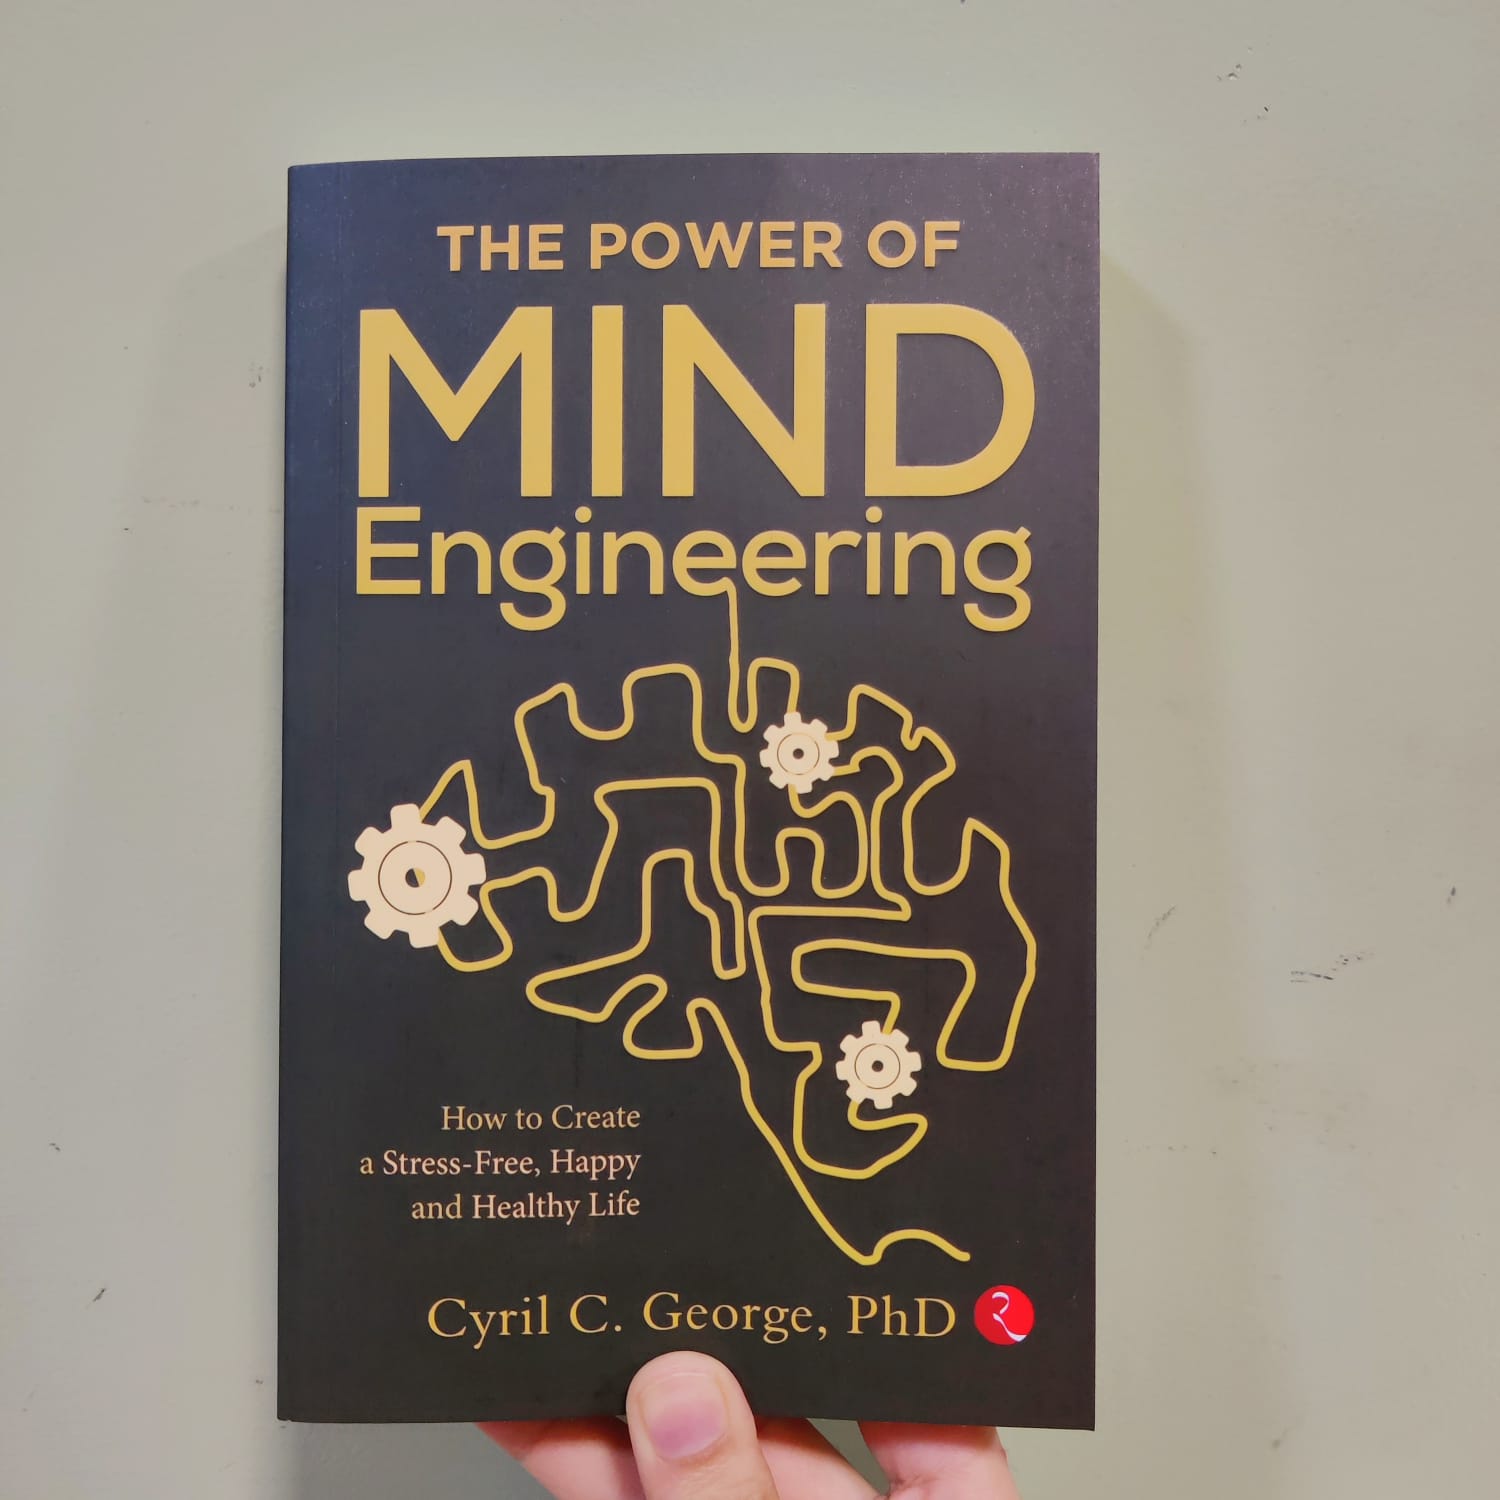 The Power of Mind Engineering